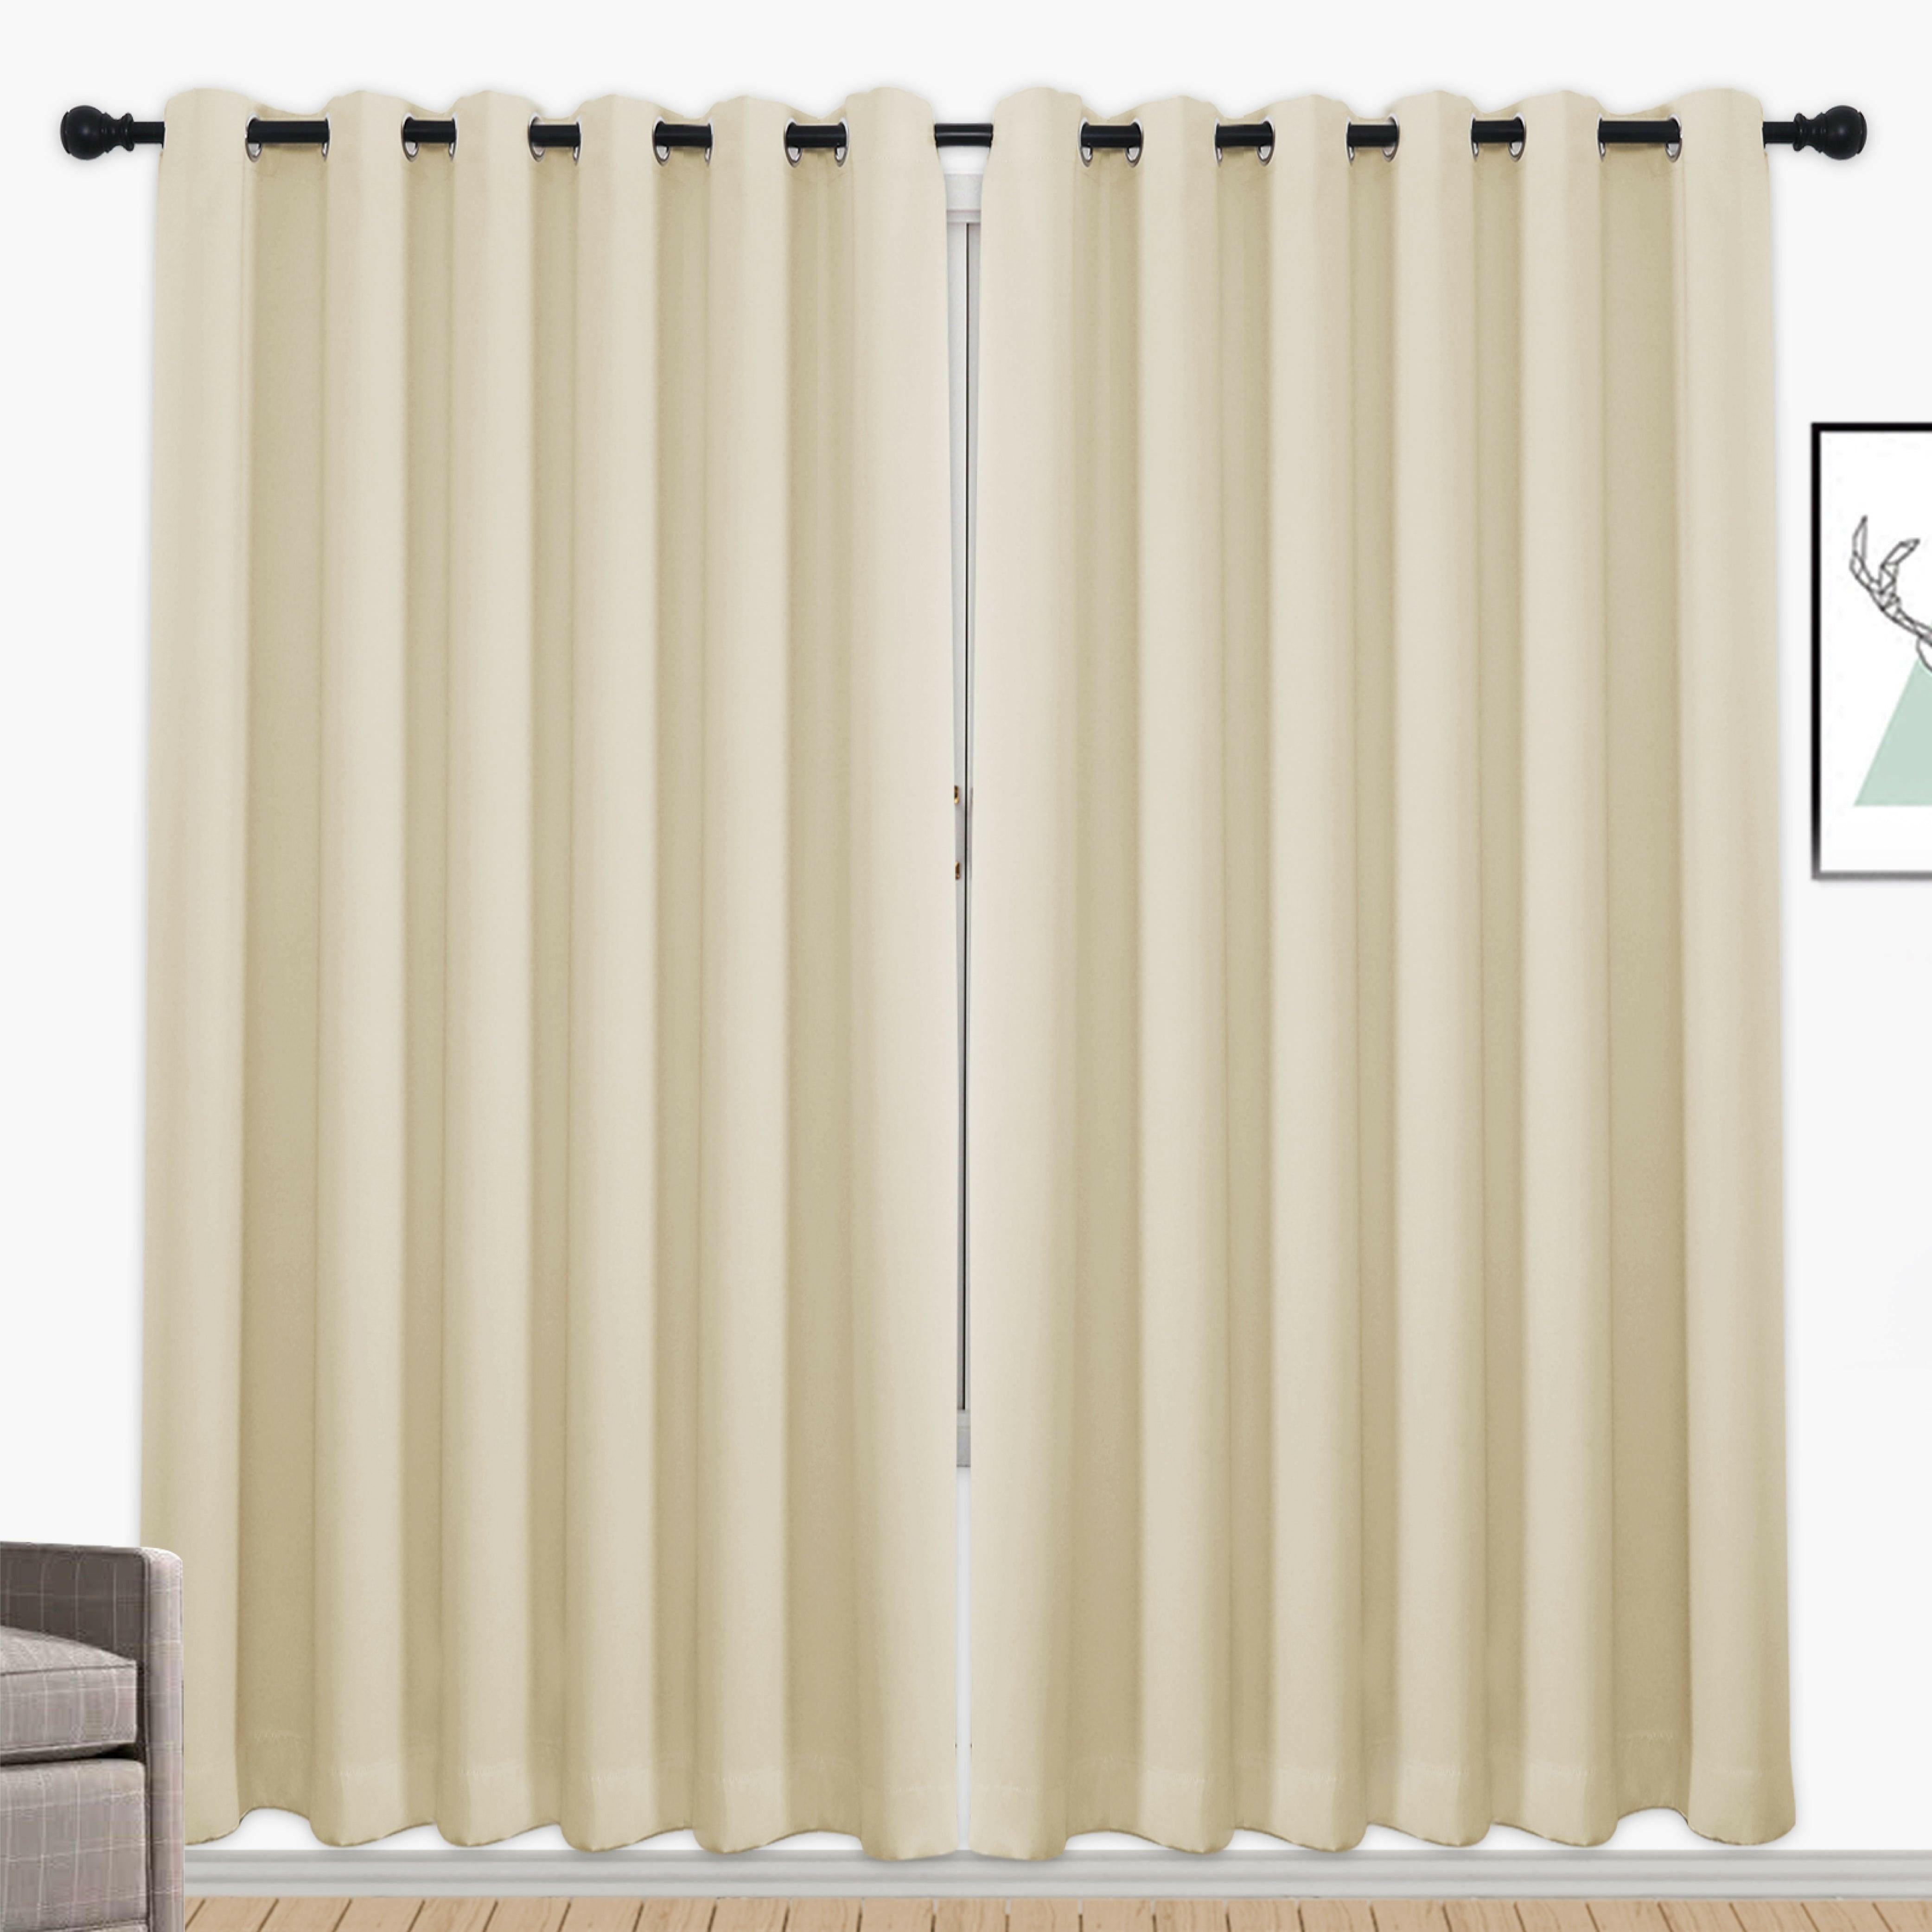 Hyper Cover 3-Layers Blockout Curtains Beige | Window Curtains | Brilliant Home Living